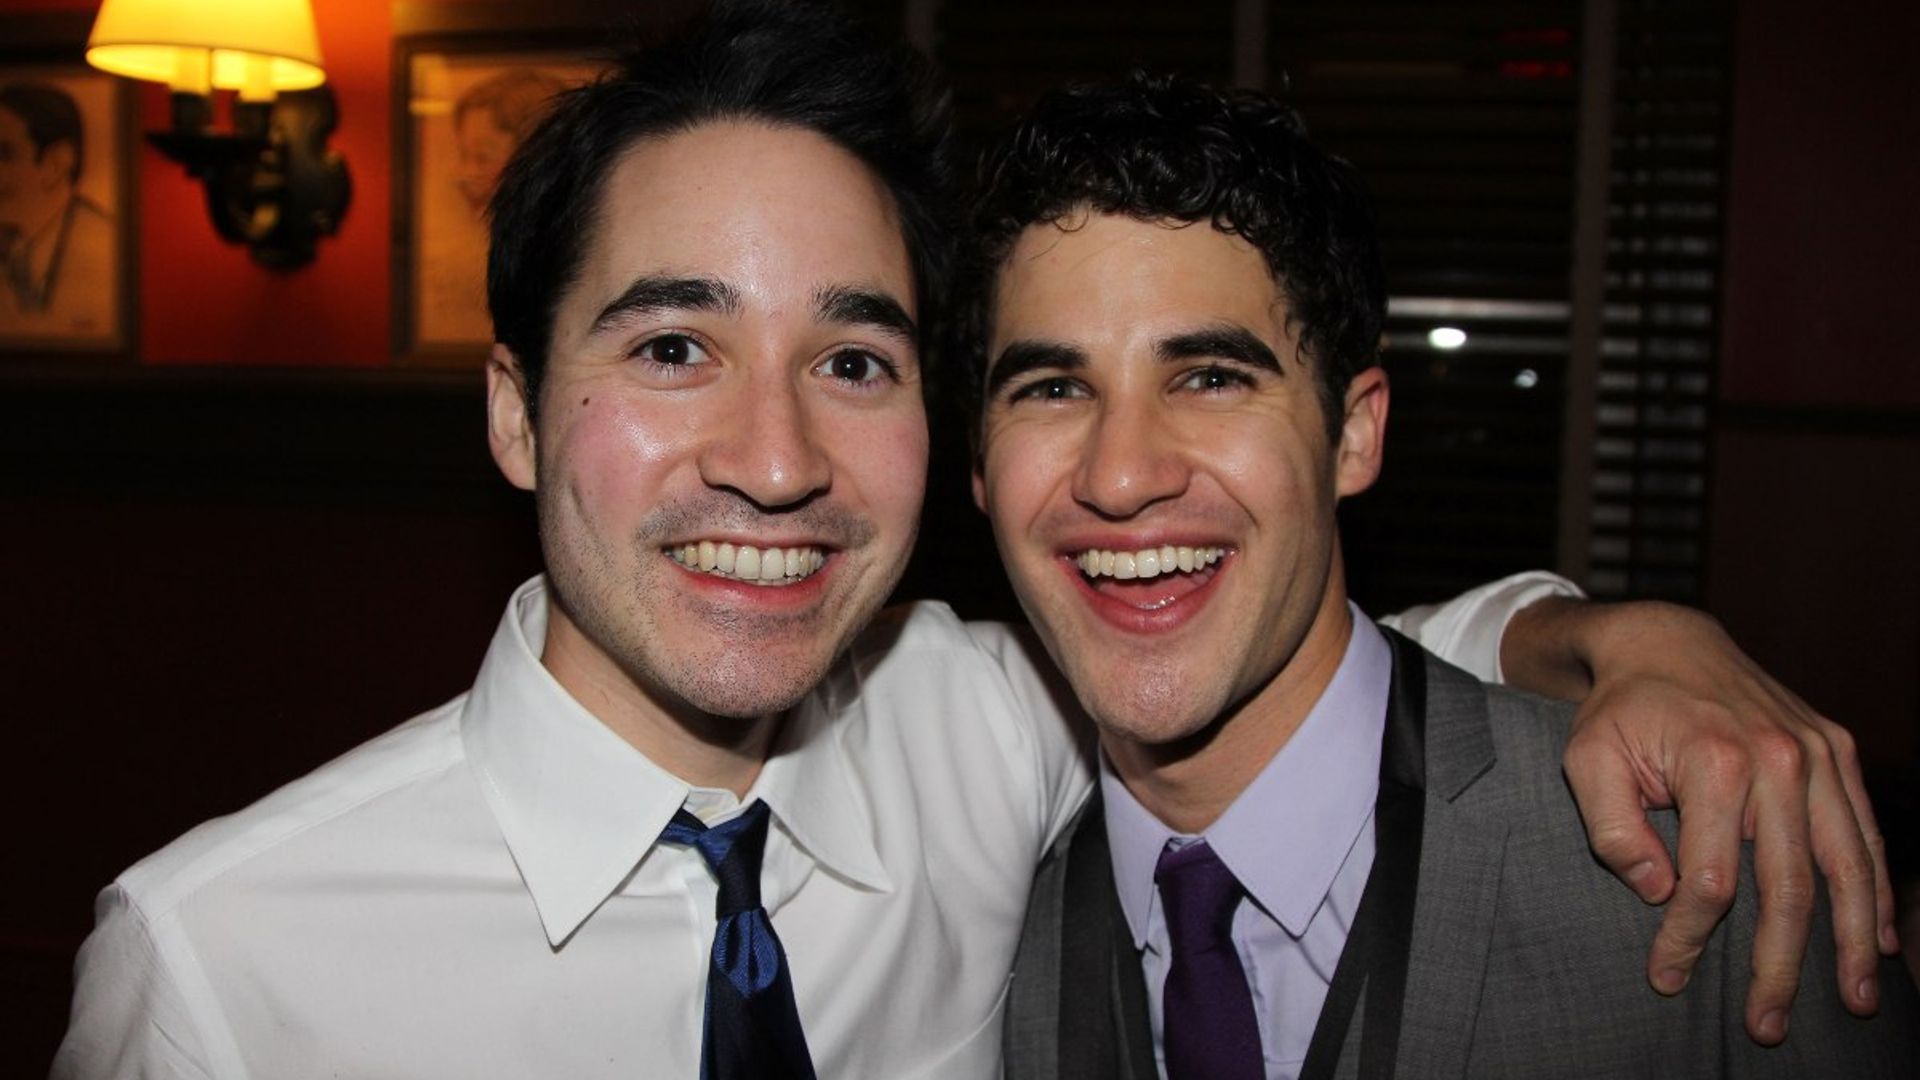 Glee star Darren Criss confirms death of brother Charles aged 36 